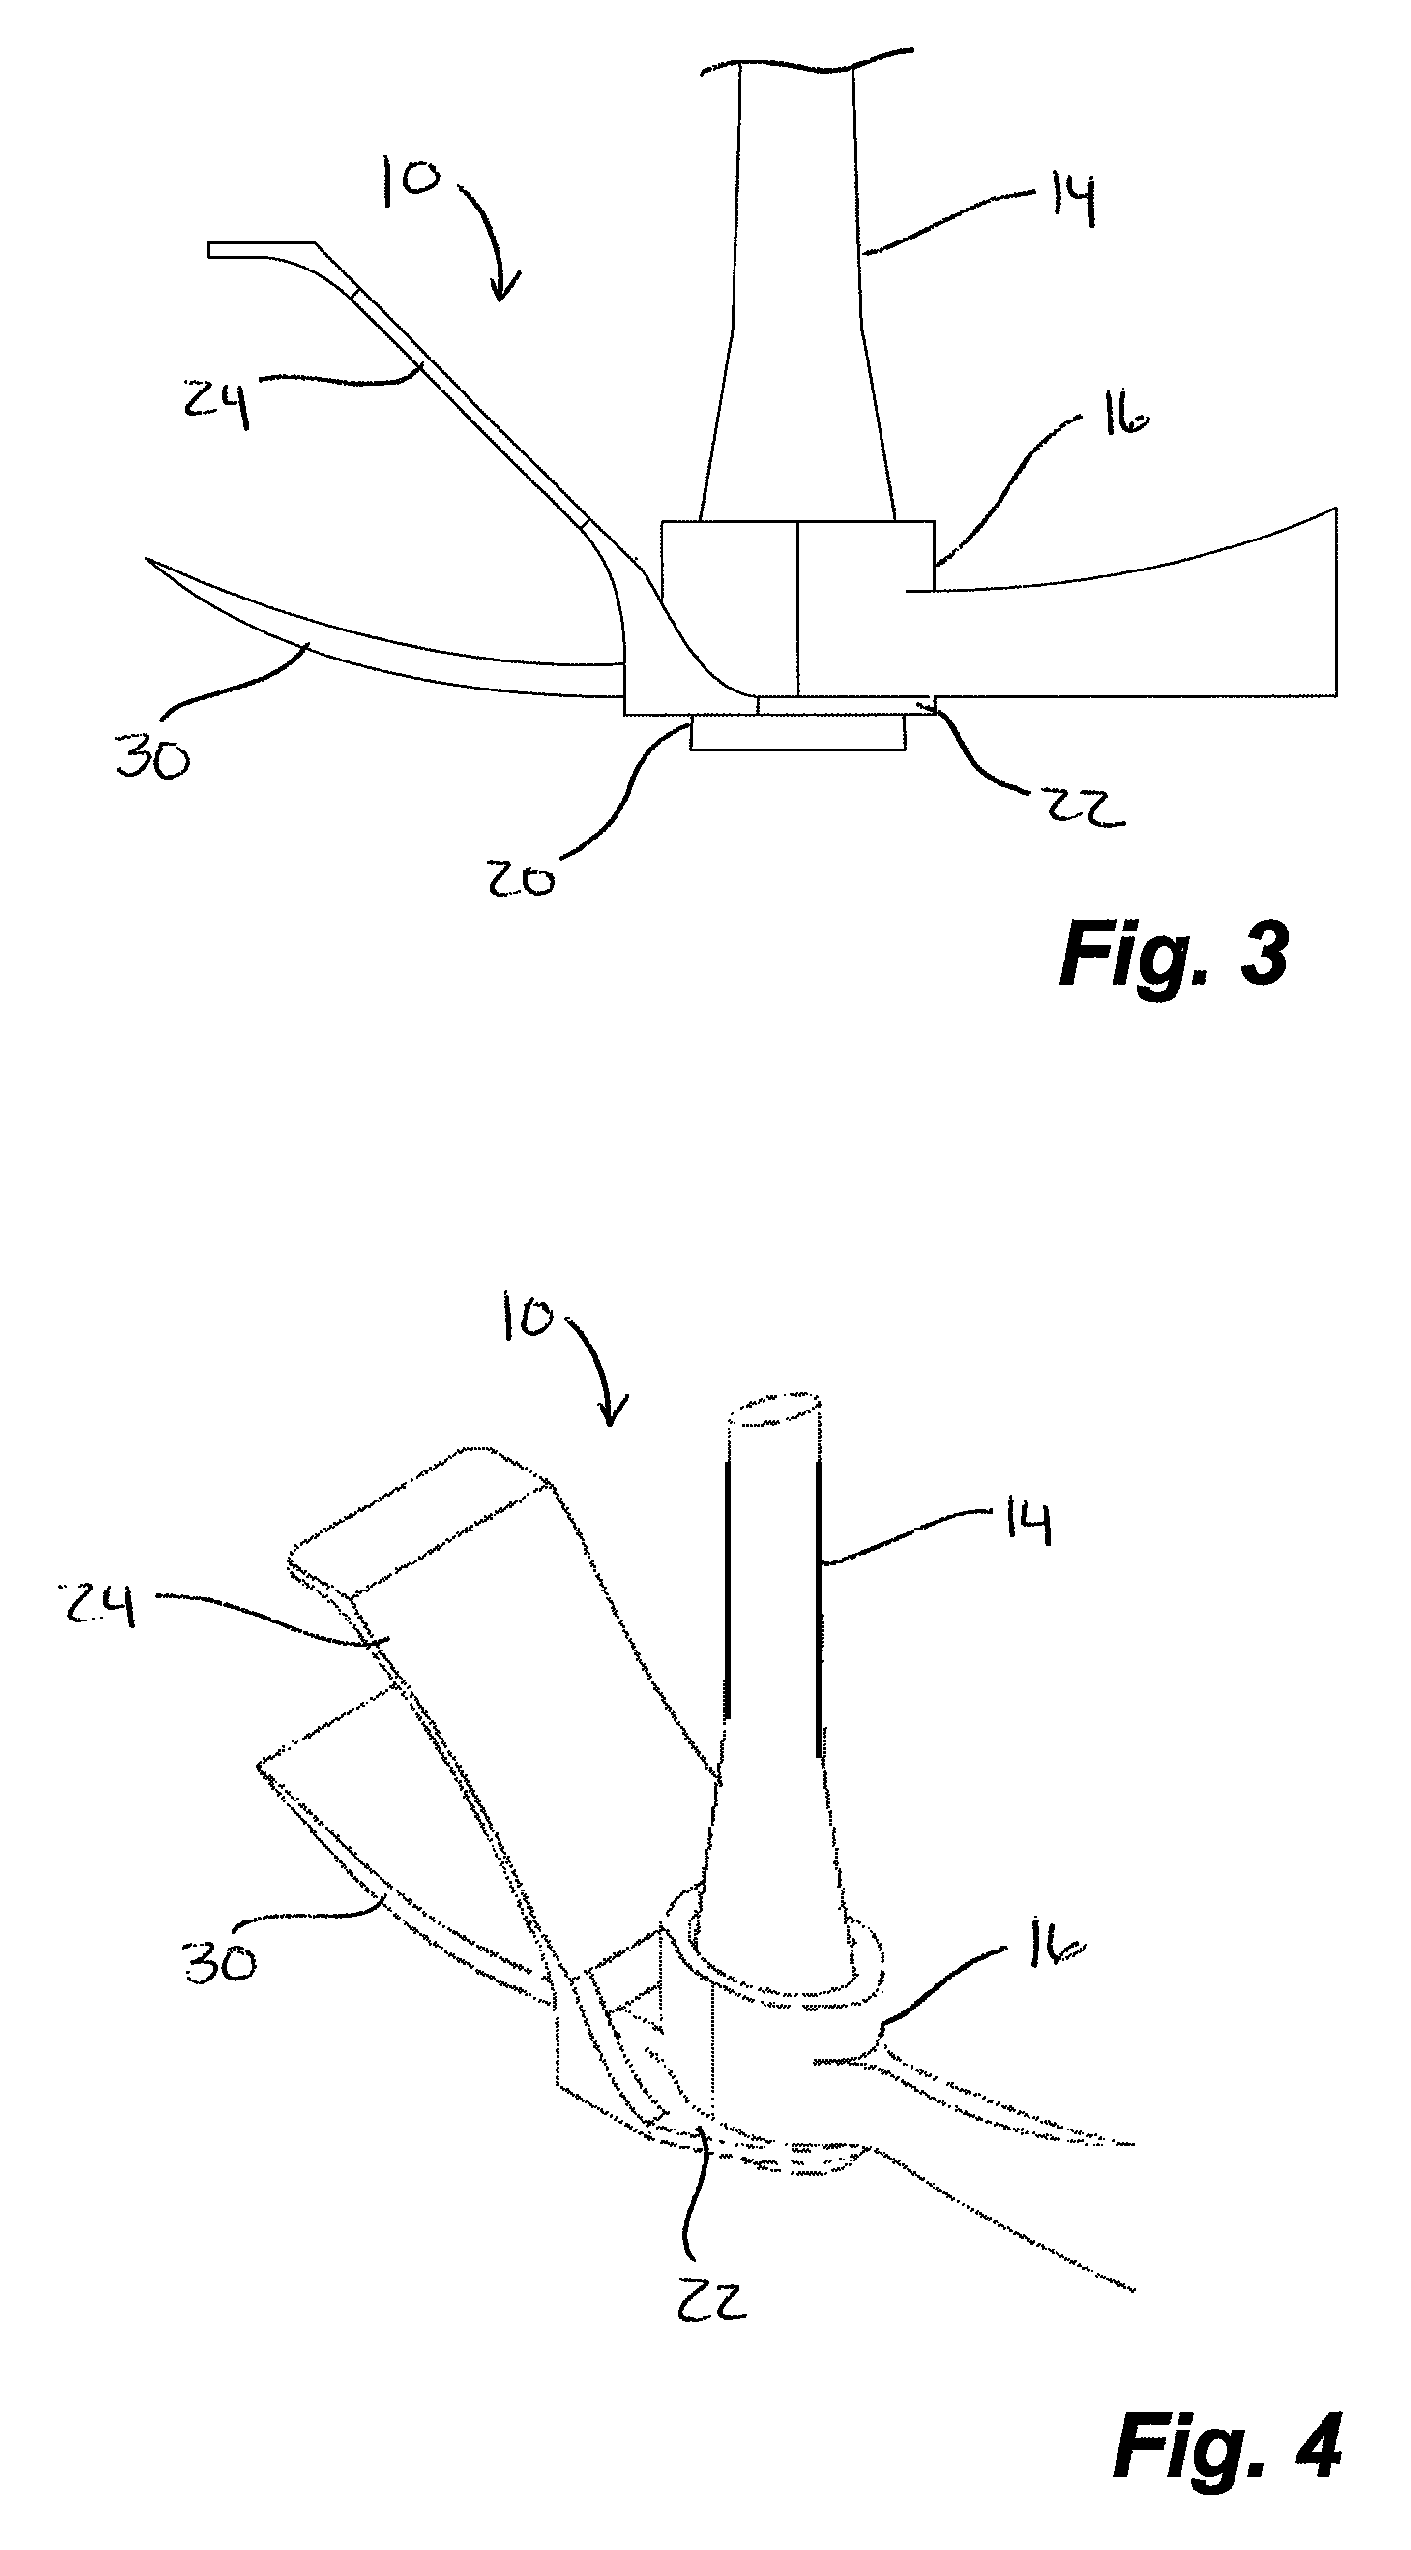 Shield attachment for hand-held digging tools